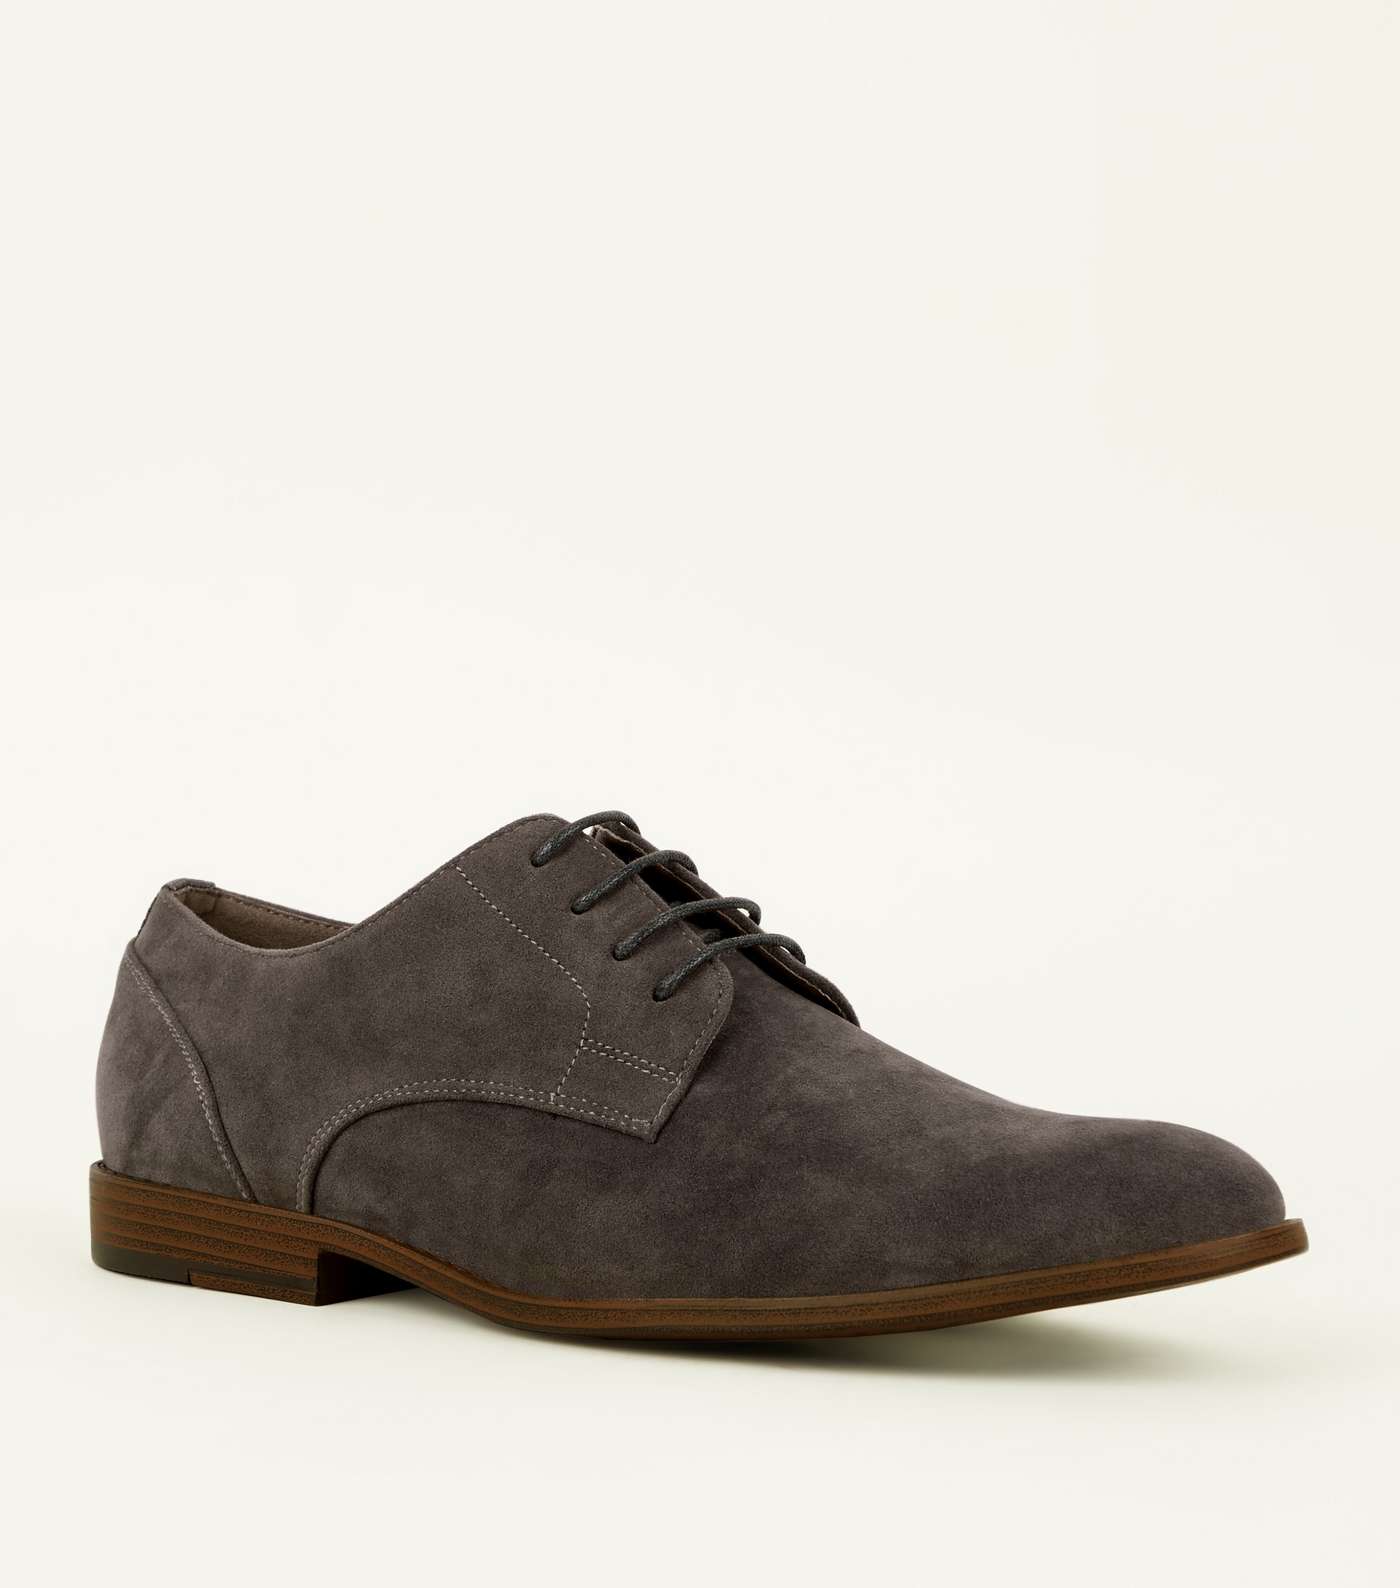 Dark Grey Faux Suede Lace-Up Desert Shoes Image 2